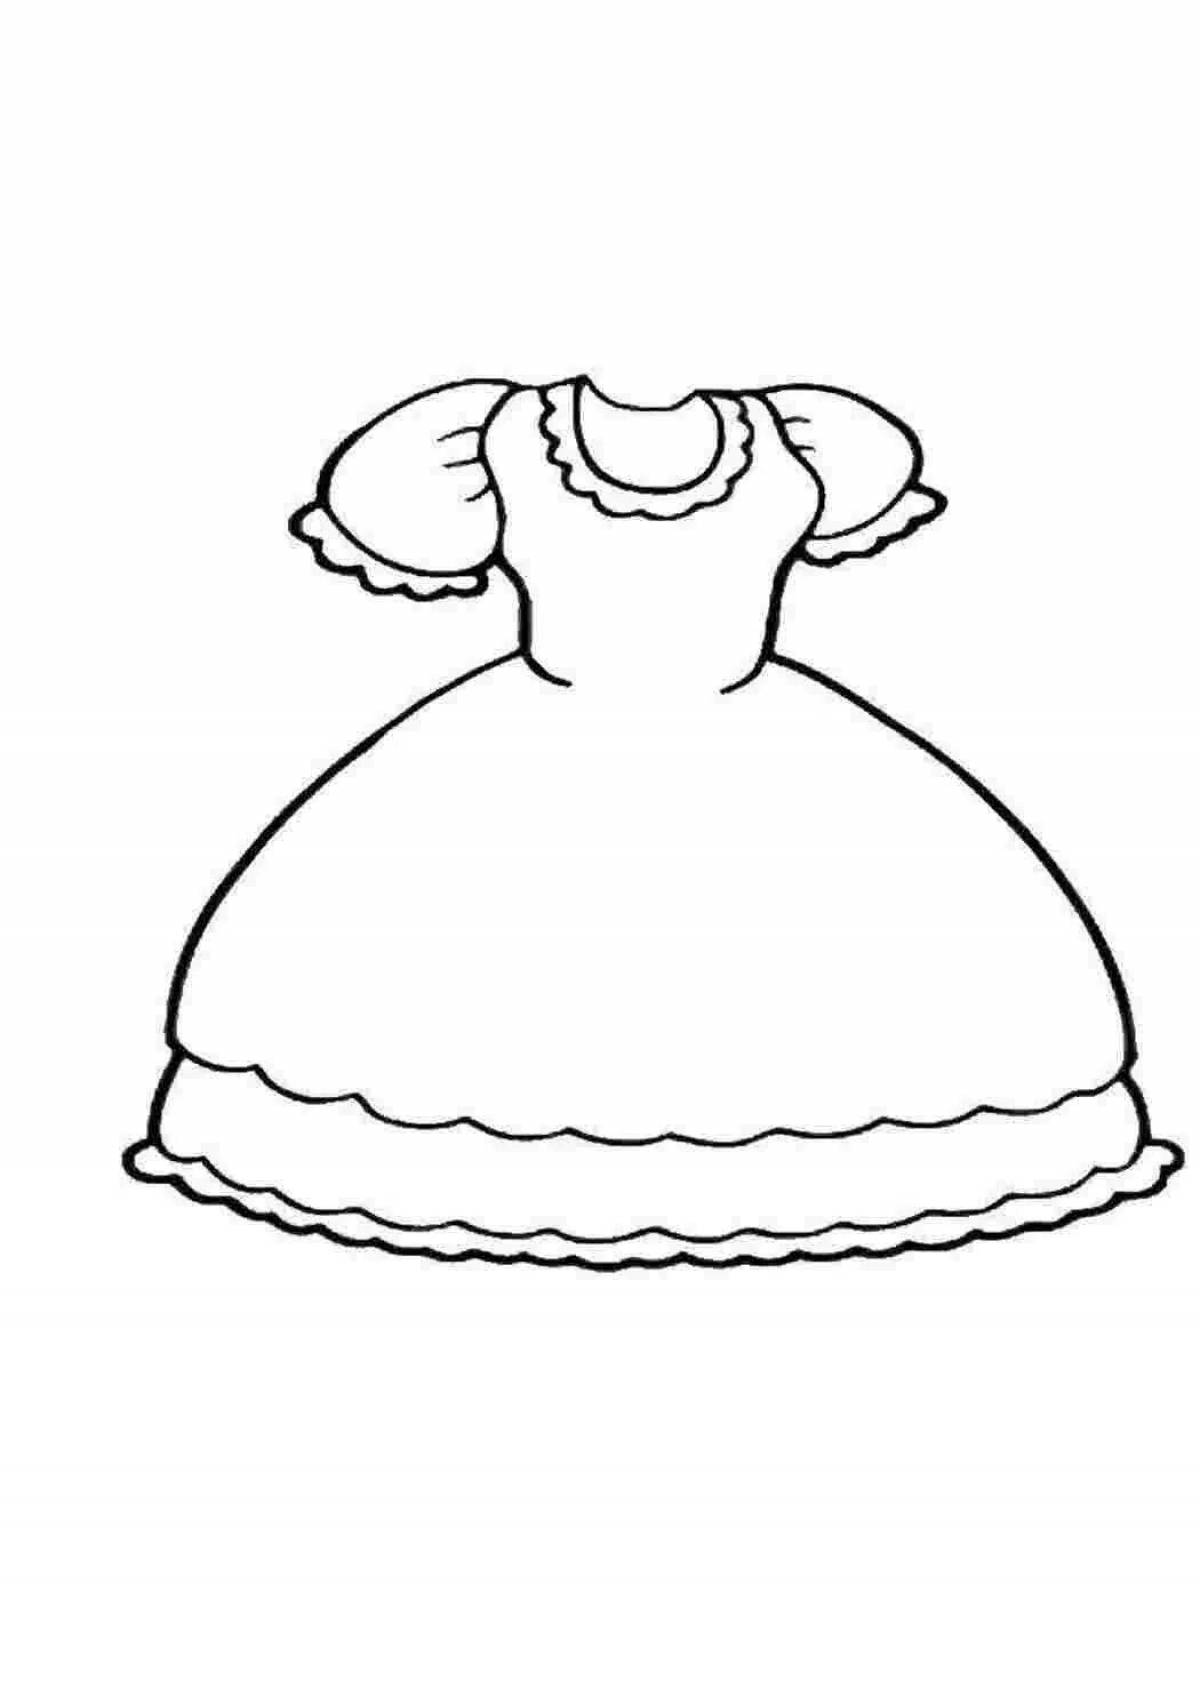 Glittering doll dress coloring page